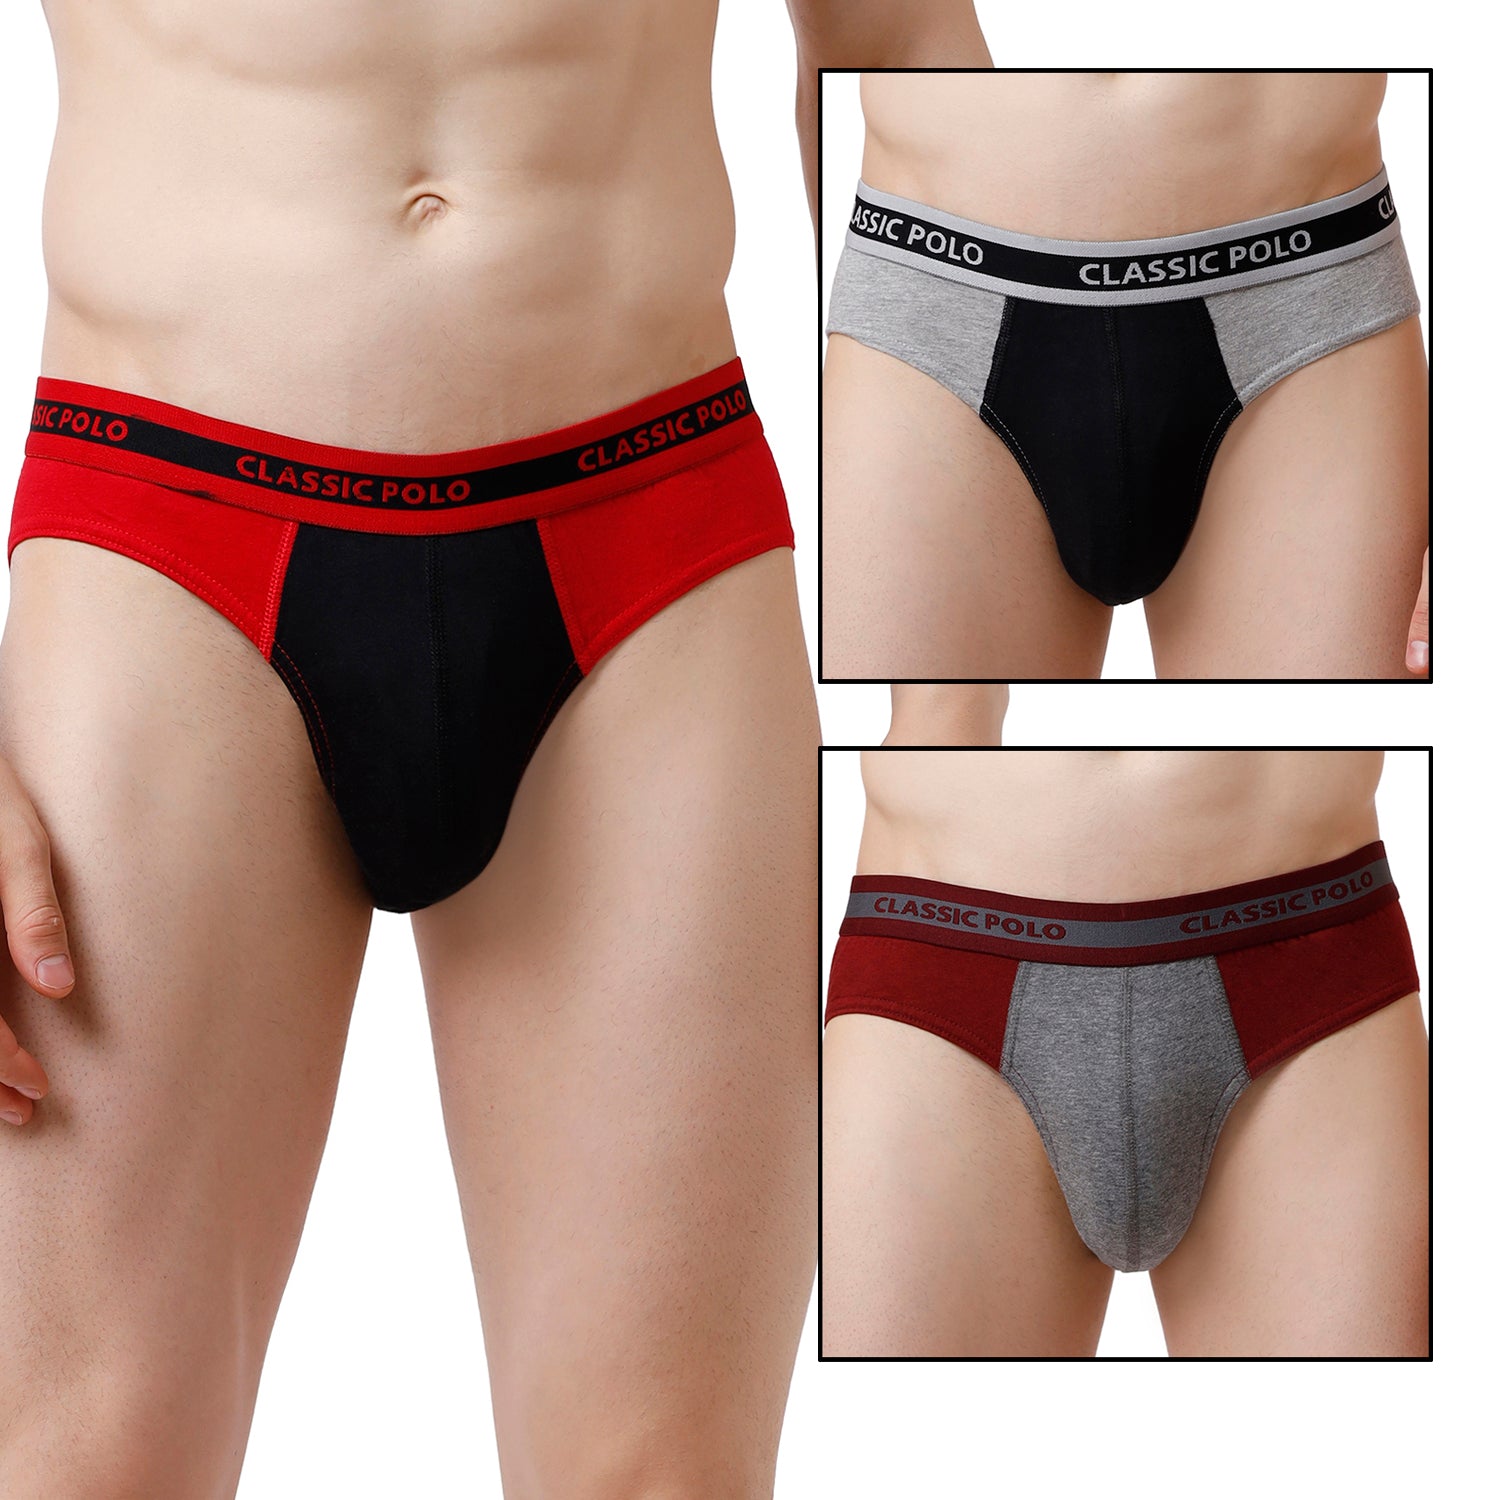 Classic Polo Men's 100% Soft Cotton Assorted Fashion Brief - Pack of 3 Dike Brief Classic Polo 